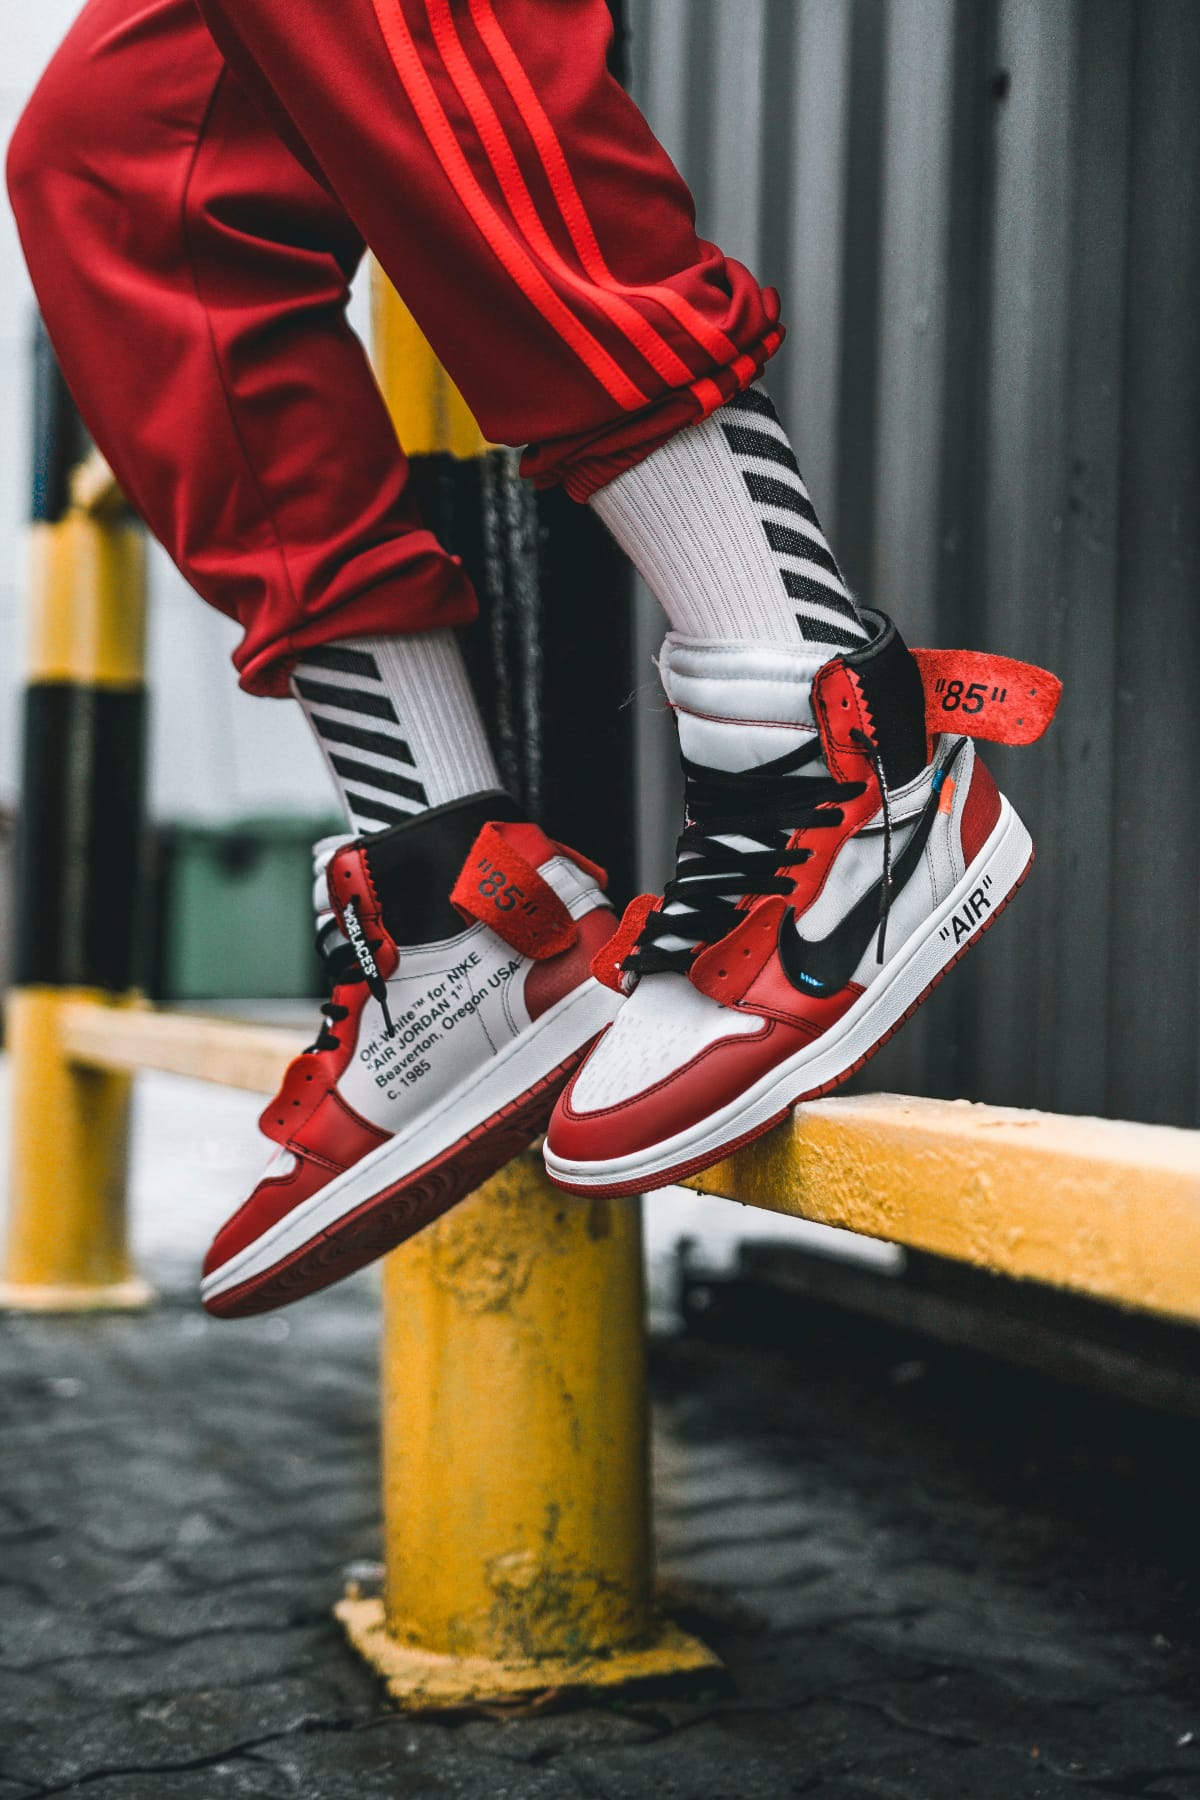 jordan off white outfit